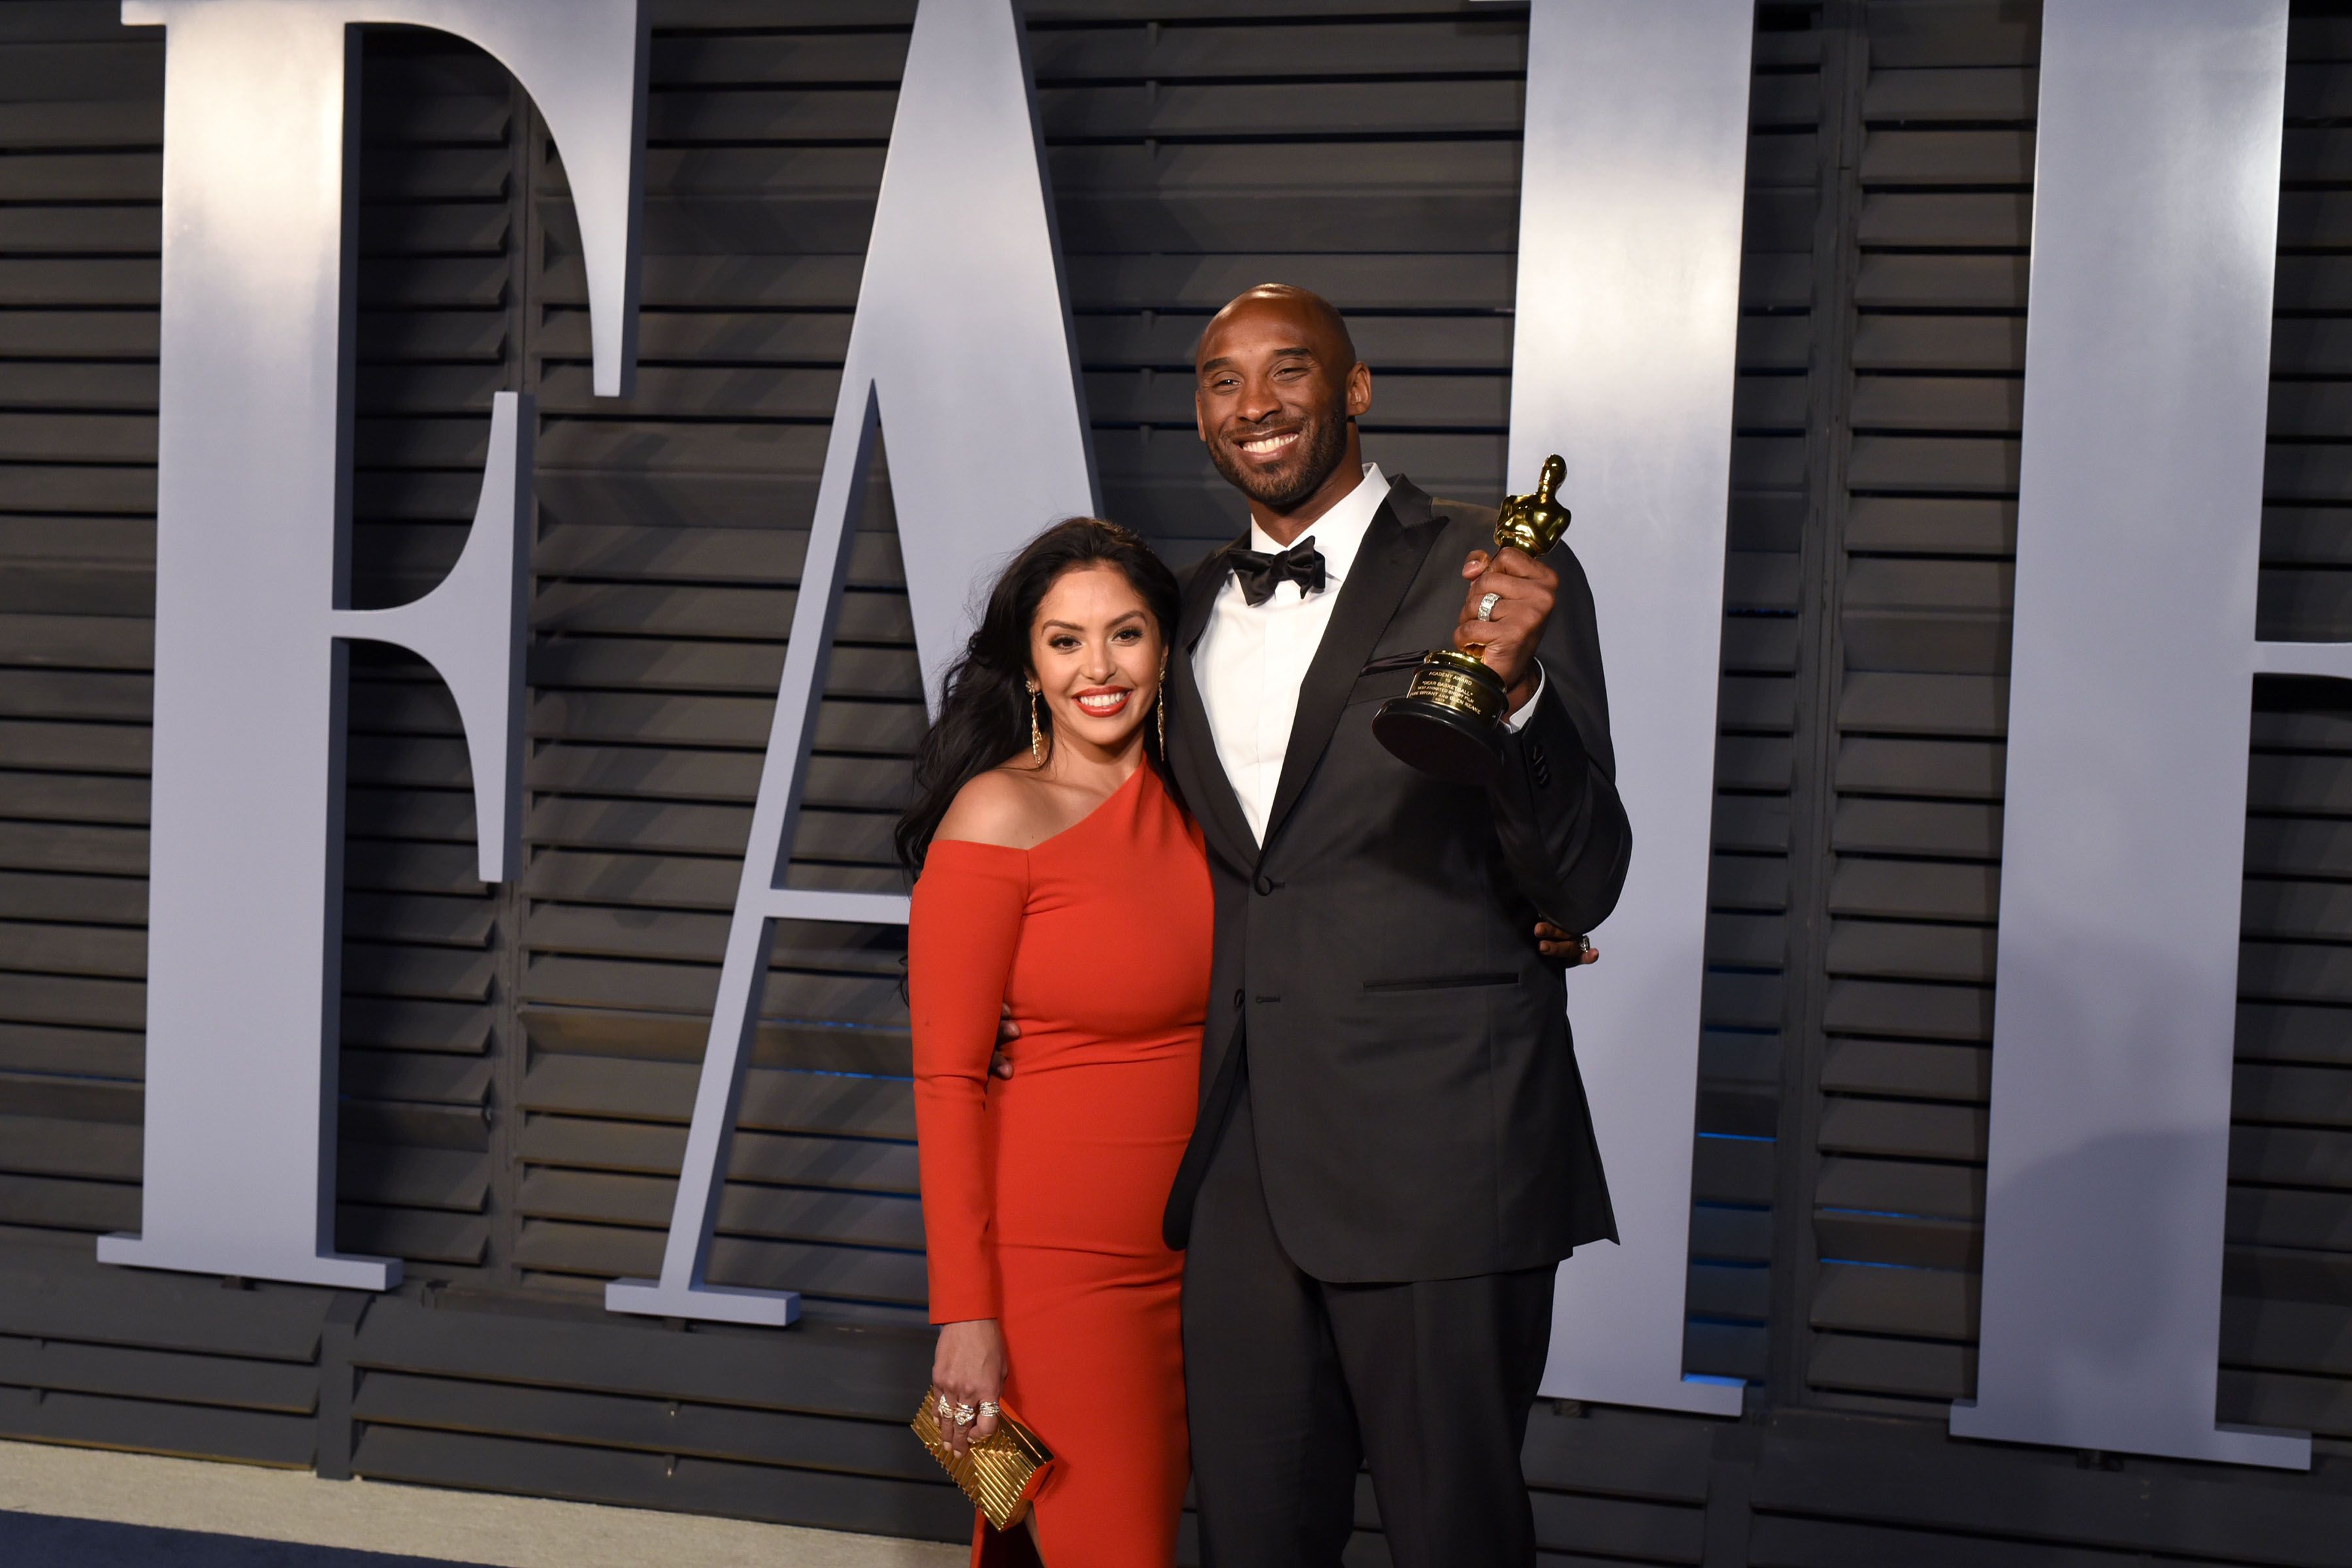 Vanessa Bryant and Kobe Bryant during the 2018 Vanity Fair Oscar Party Hosted By Radhika Jones - Arrivals at Wallis Annenberg Center for the Performing Arts on March 4, 2018 in Beverly Hills, CA. | Source: Getty Images